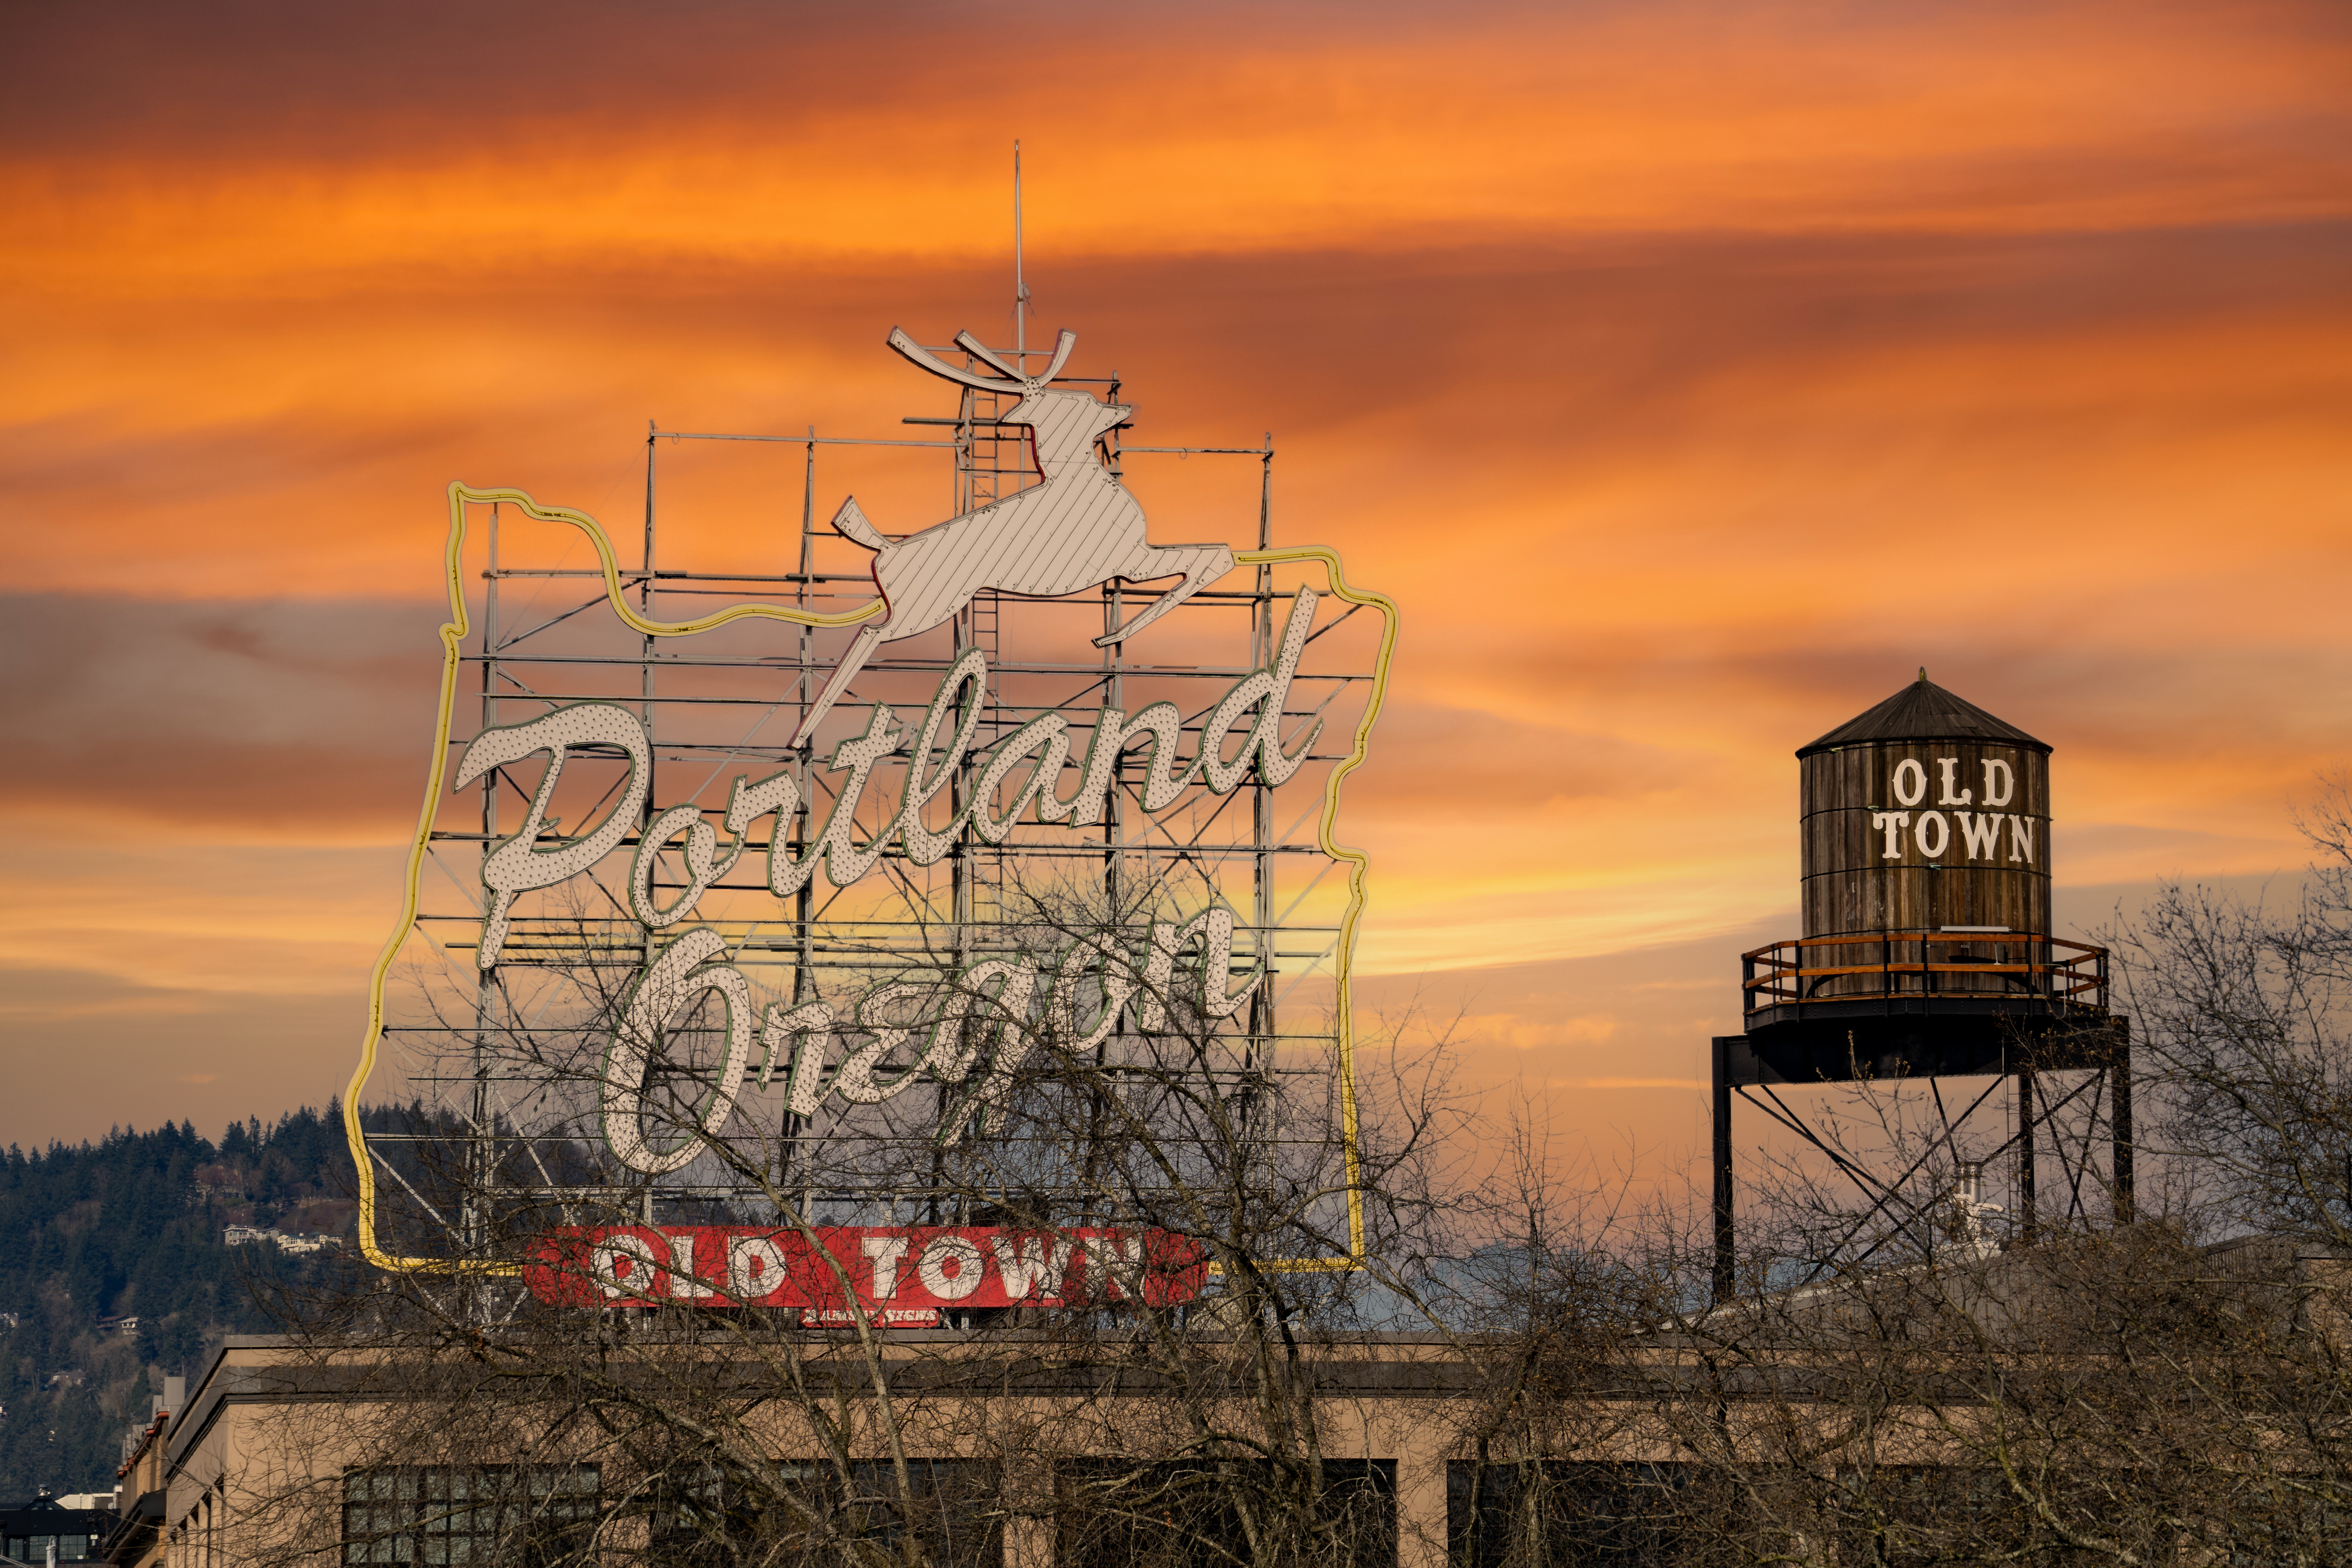 The famous white stag sign in Portland, Oregon.